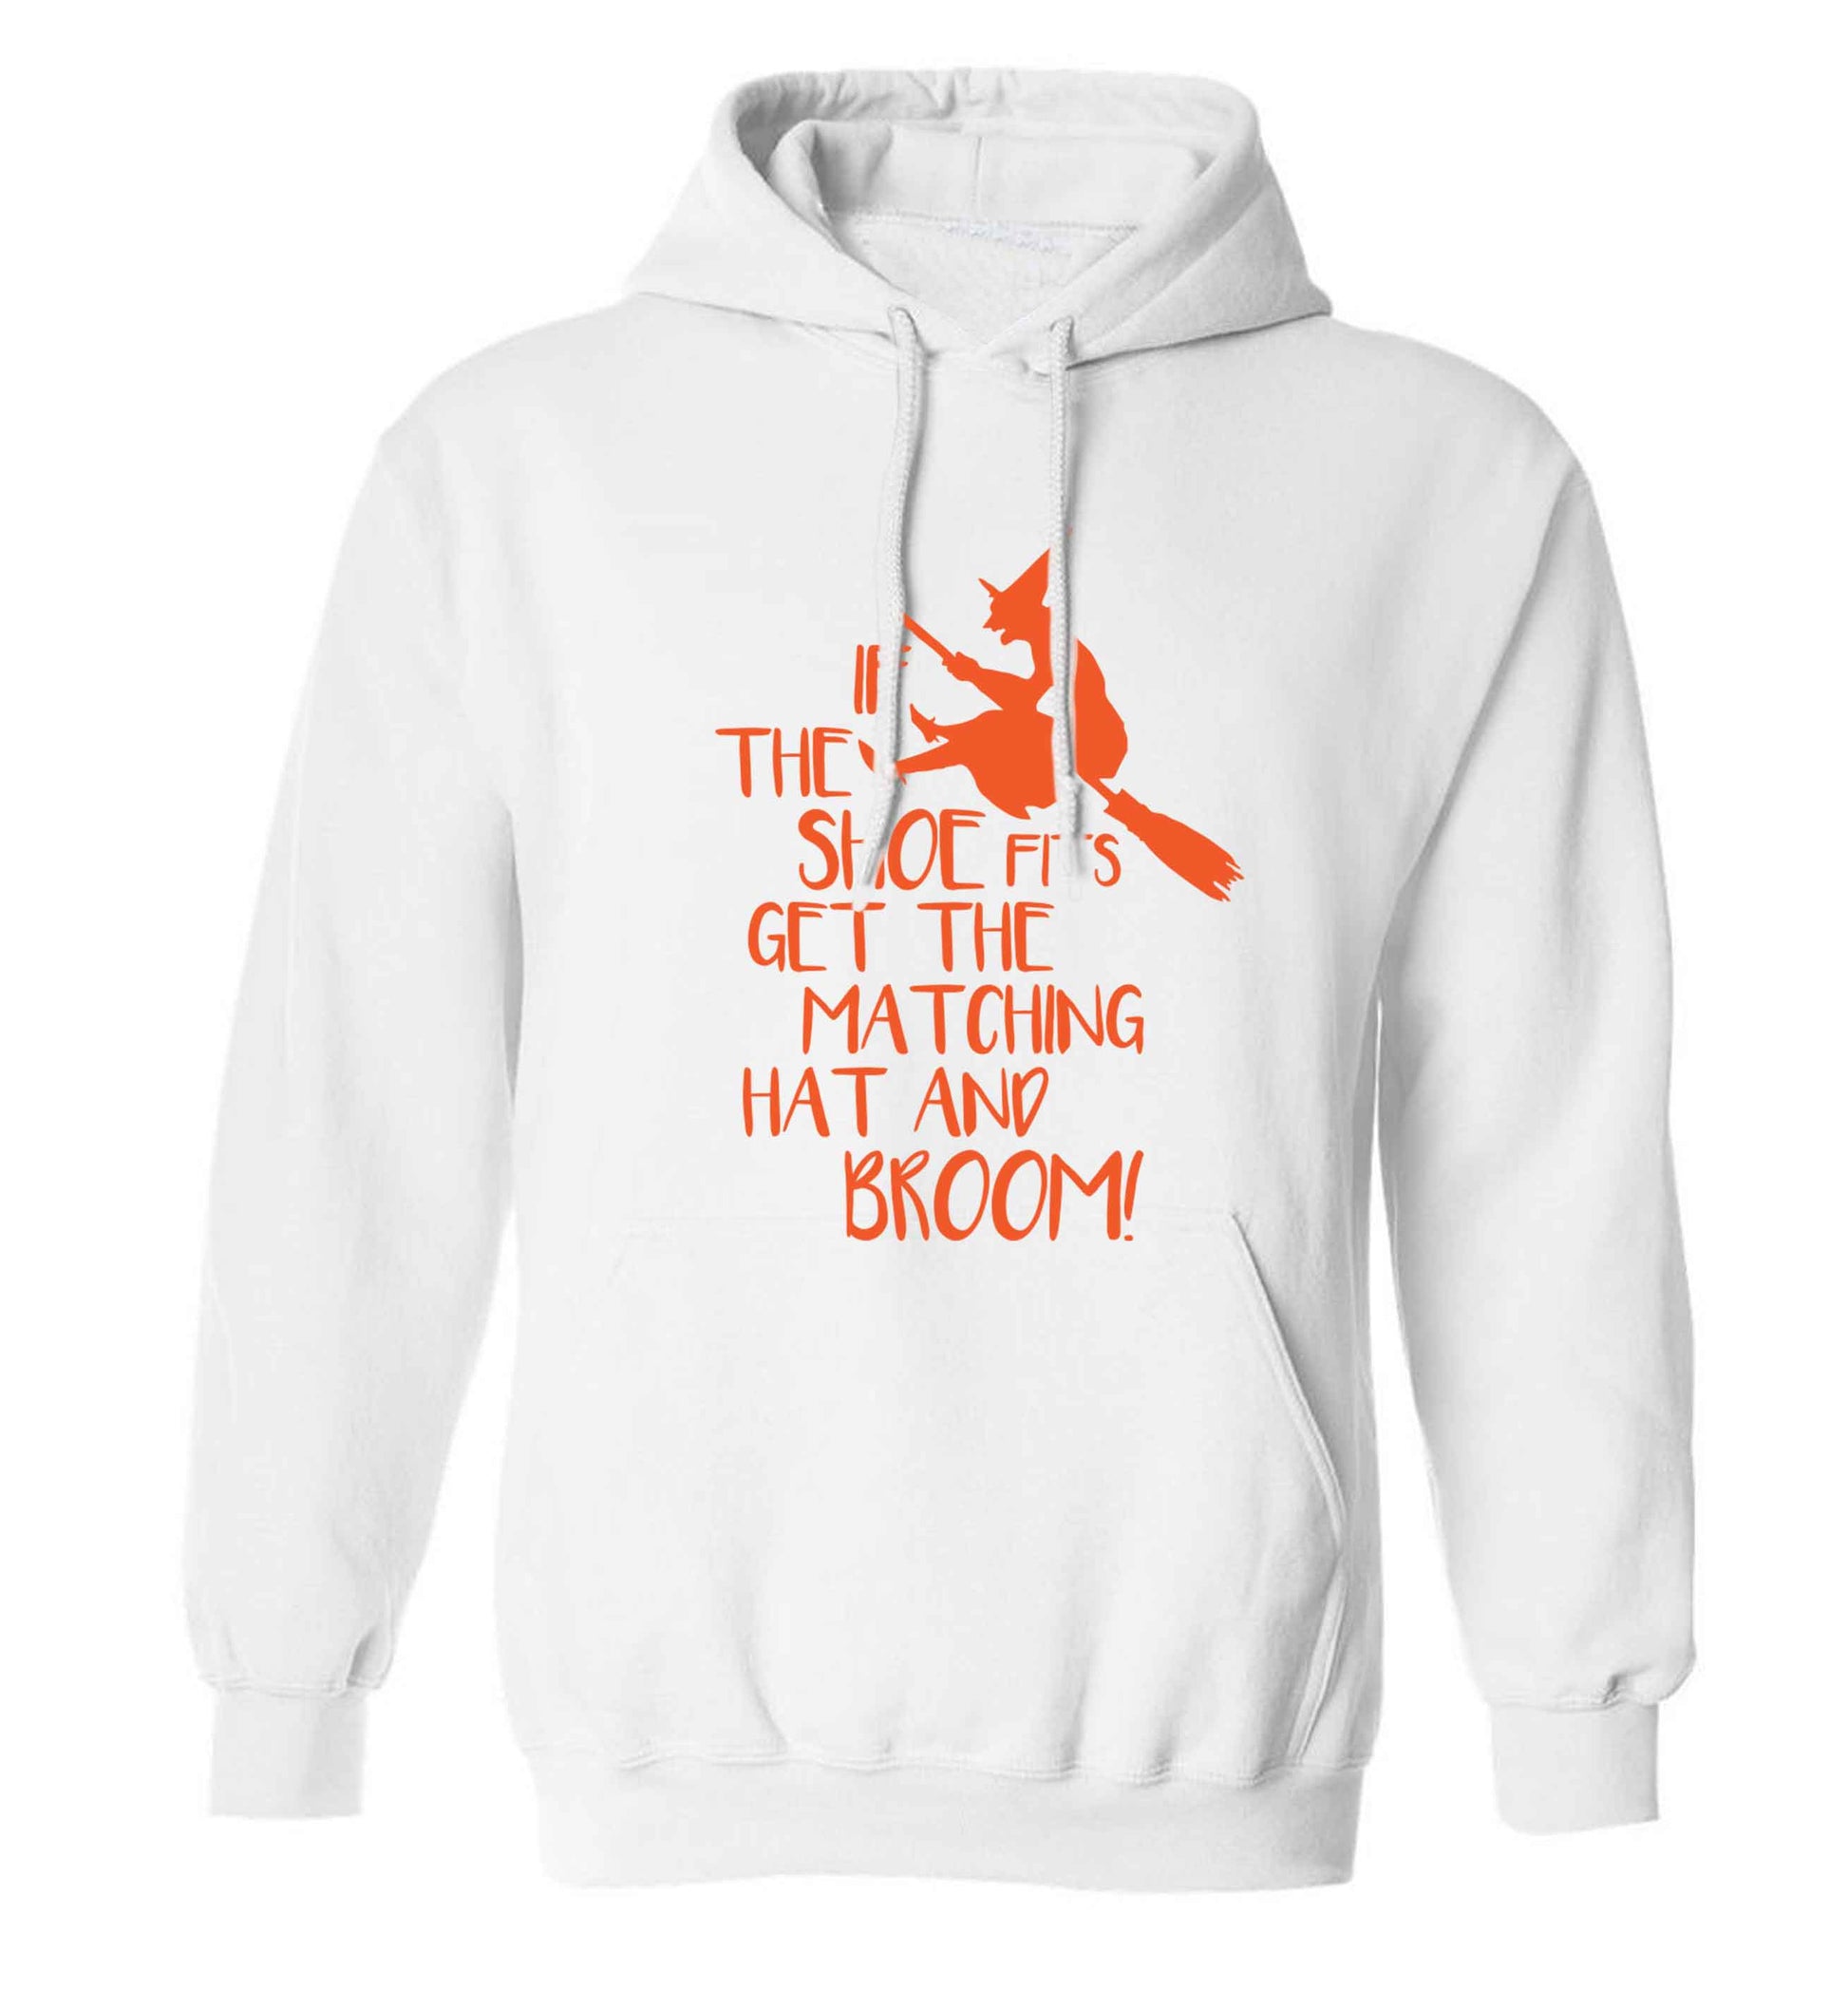 If the shoe fits get the matching hat and broom adults unisex white hoodie 2XL